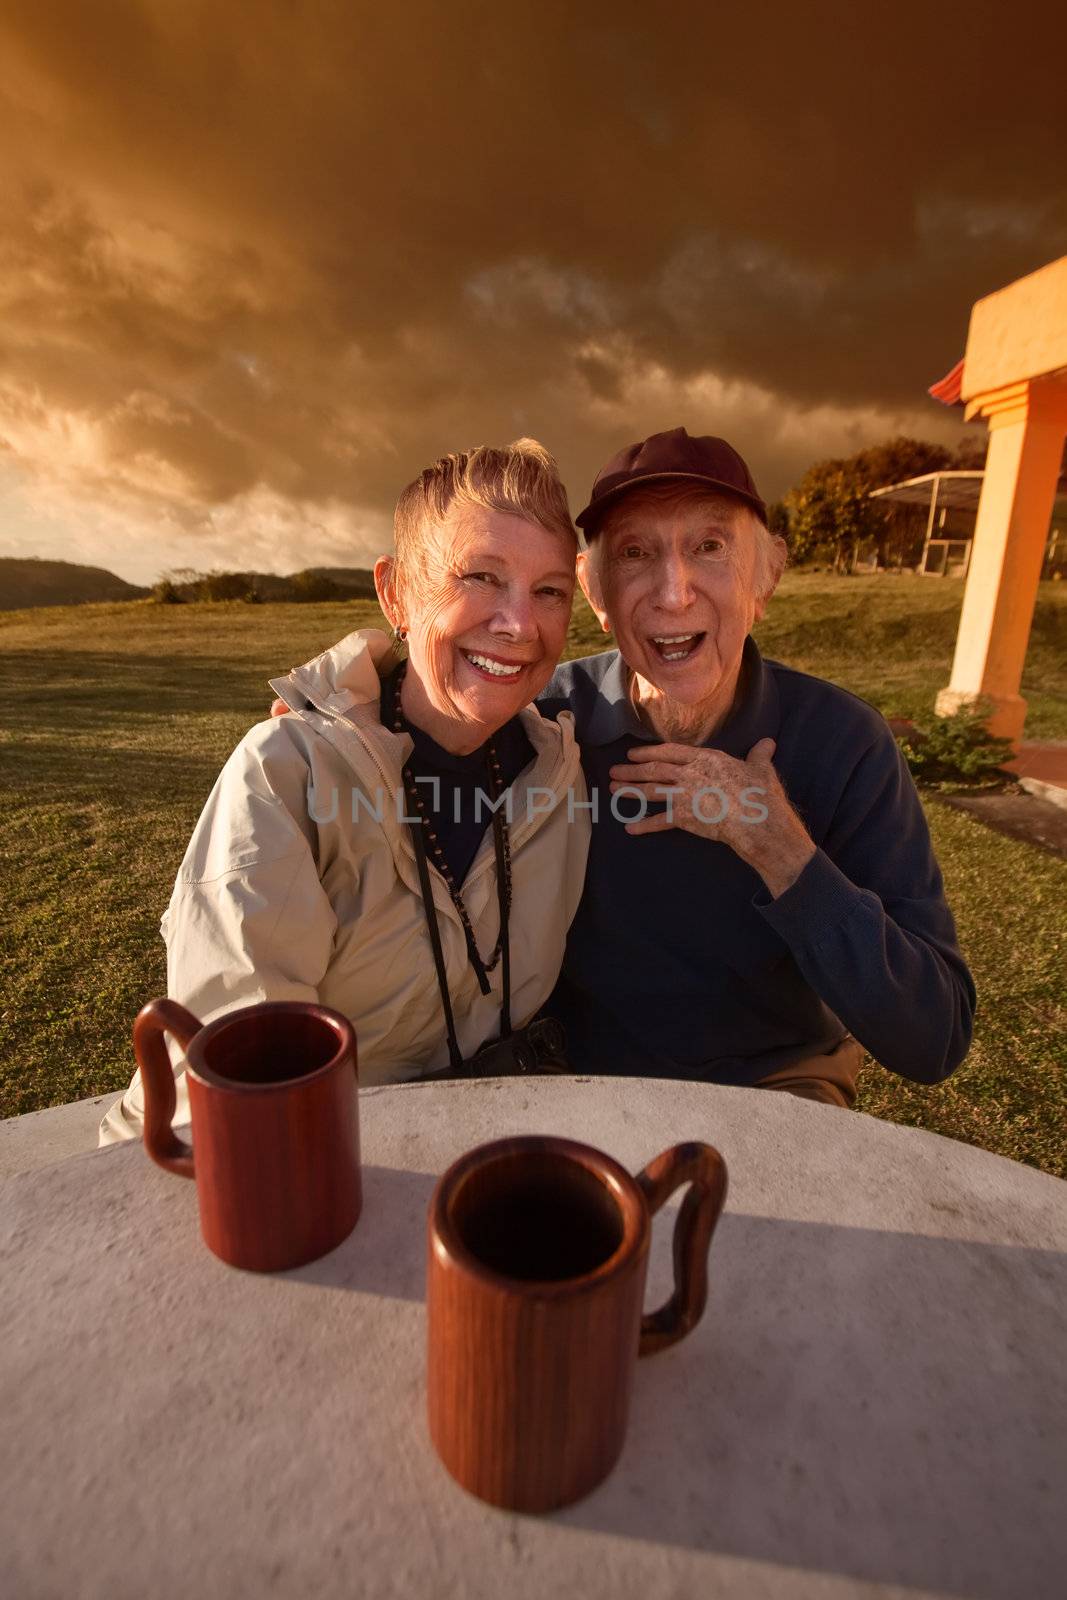 Cute elderly couple at table in a field